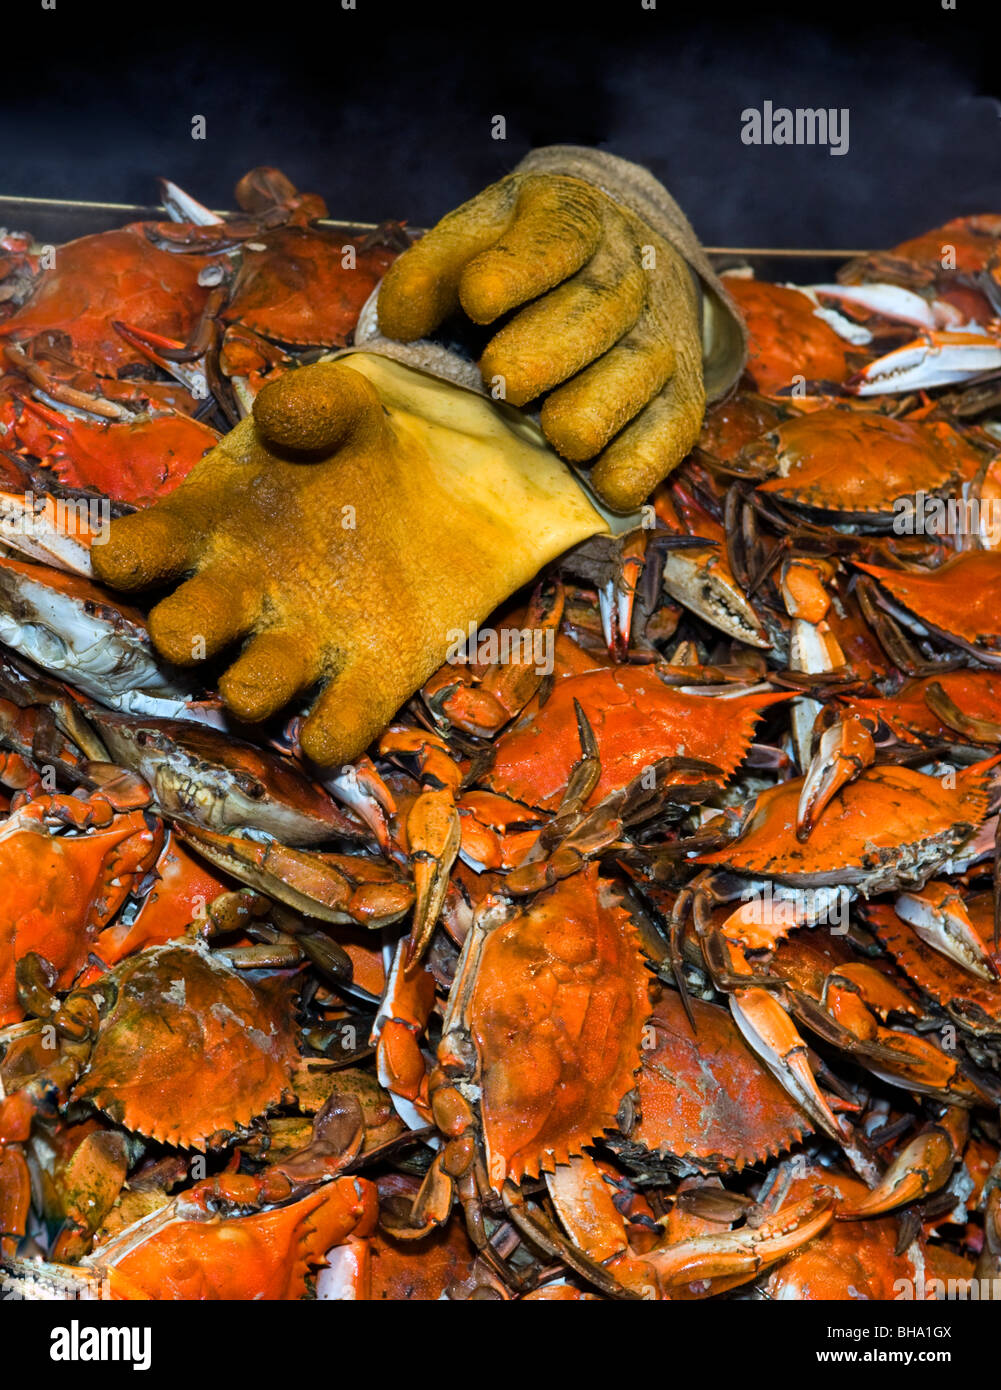 Steamed blue crabs on display at the wharf a waterfront seafood stand on Maine Avenue in Washington DC. Stock Photo